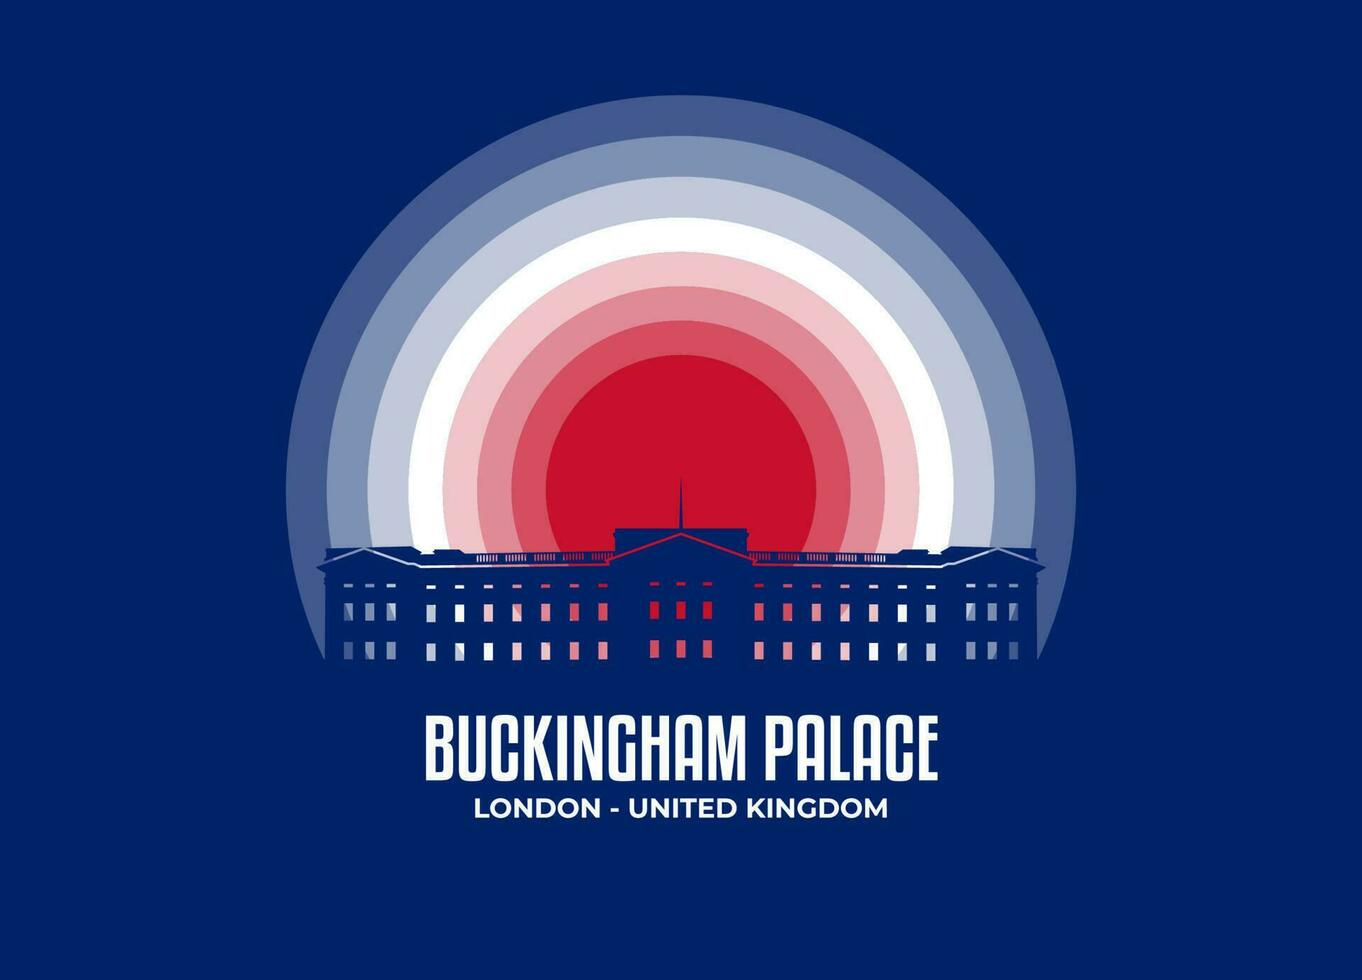 Buckingham Pallace. Moonlight illustration of famous historical statue and architecture in United Kingdom. Color tone based on flag. Vector eps 10